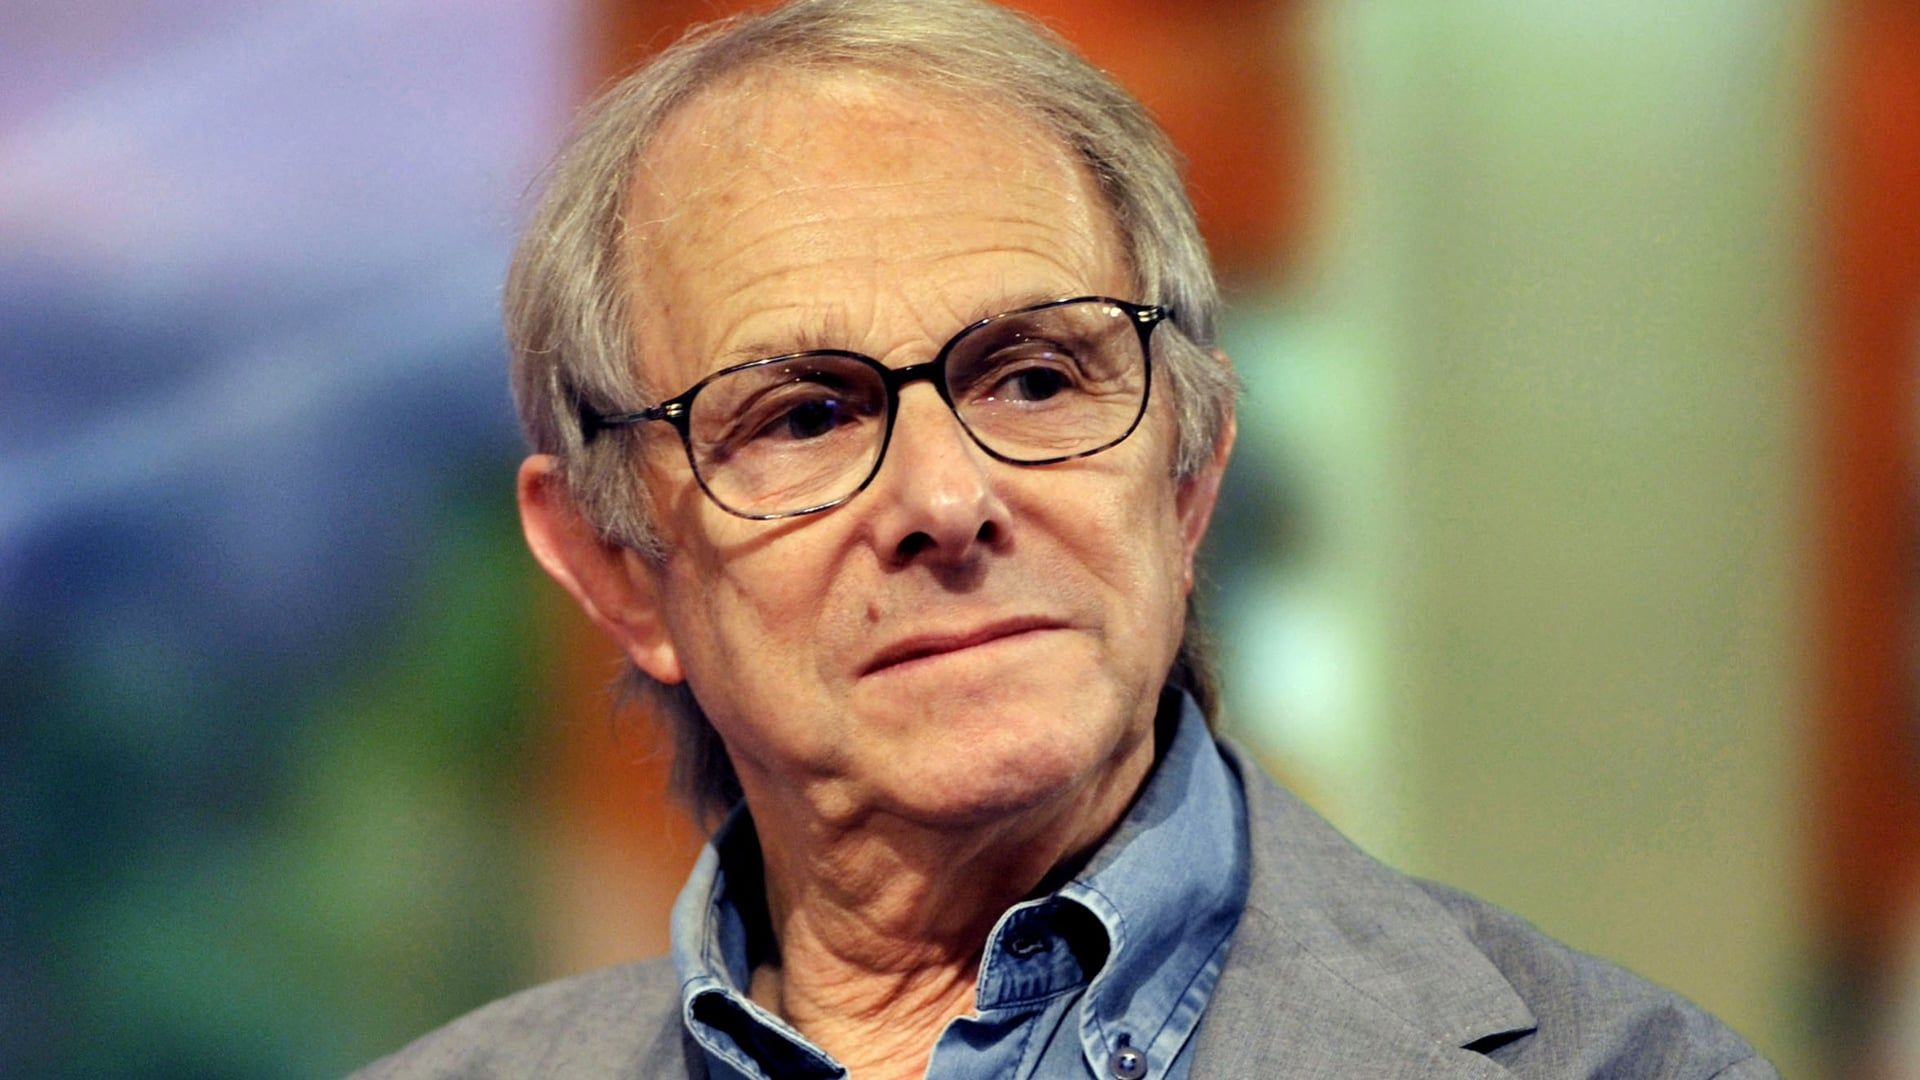 Versus: The Life and Films of Ken Loach background